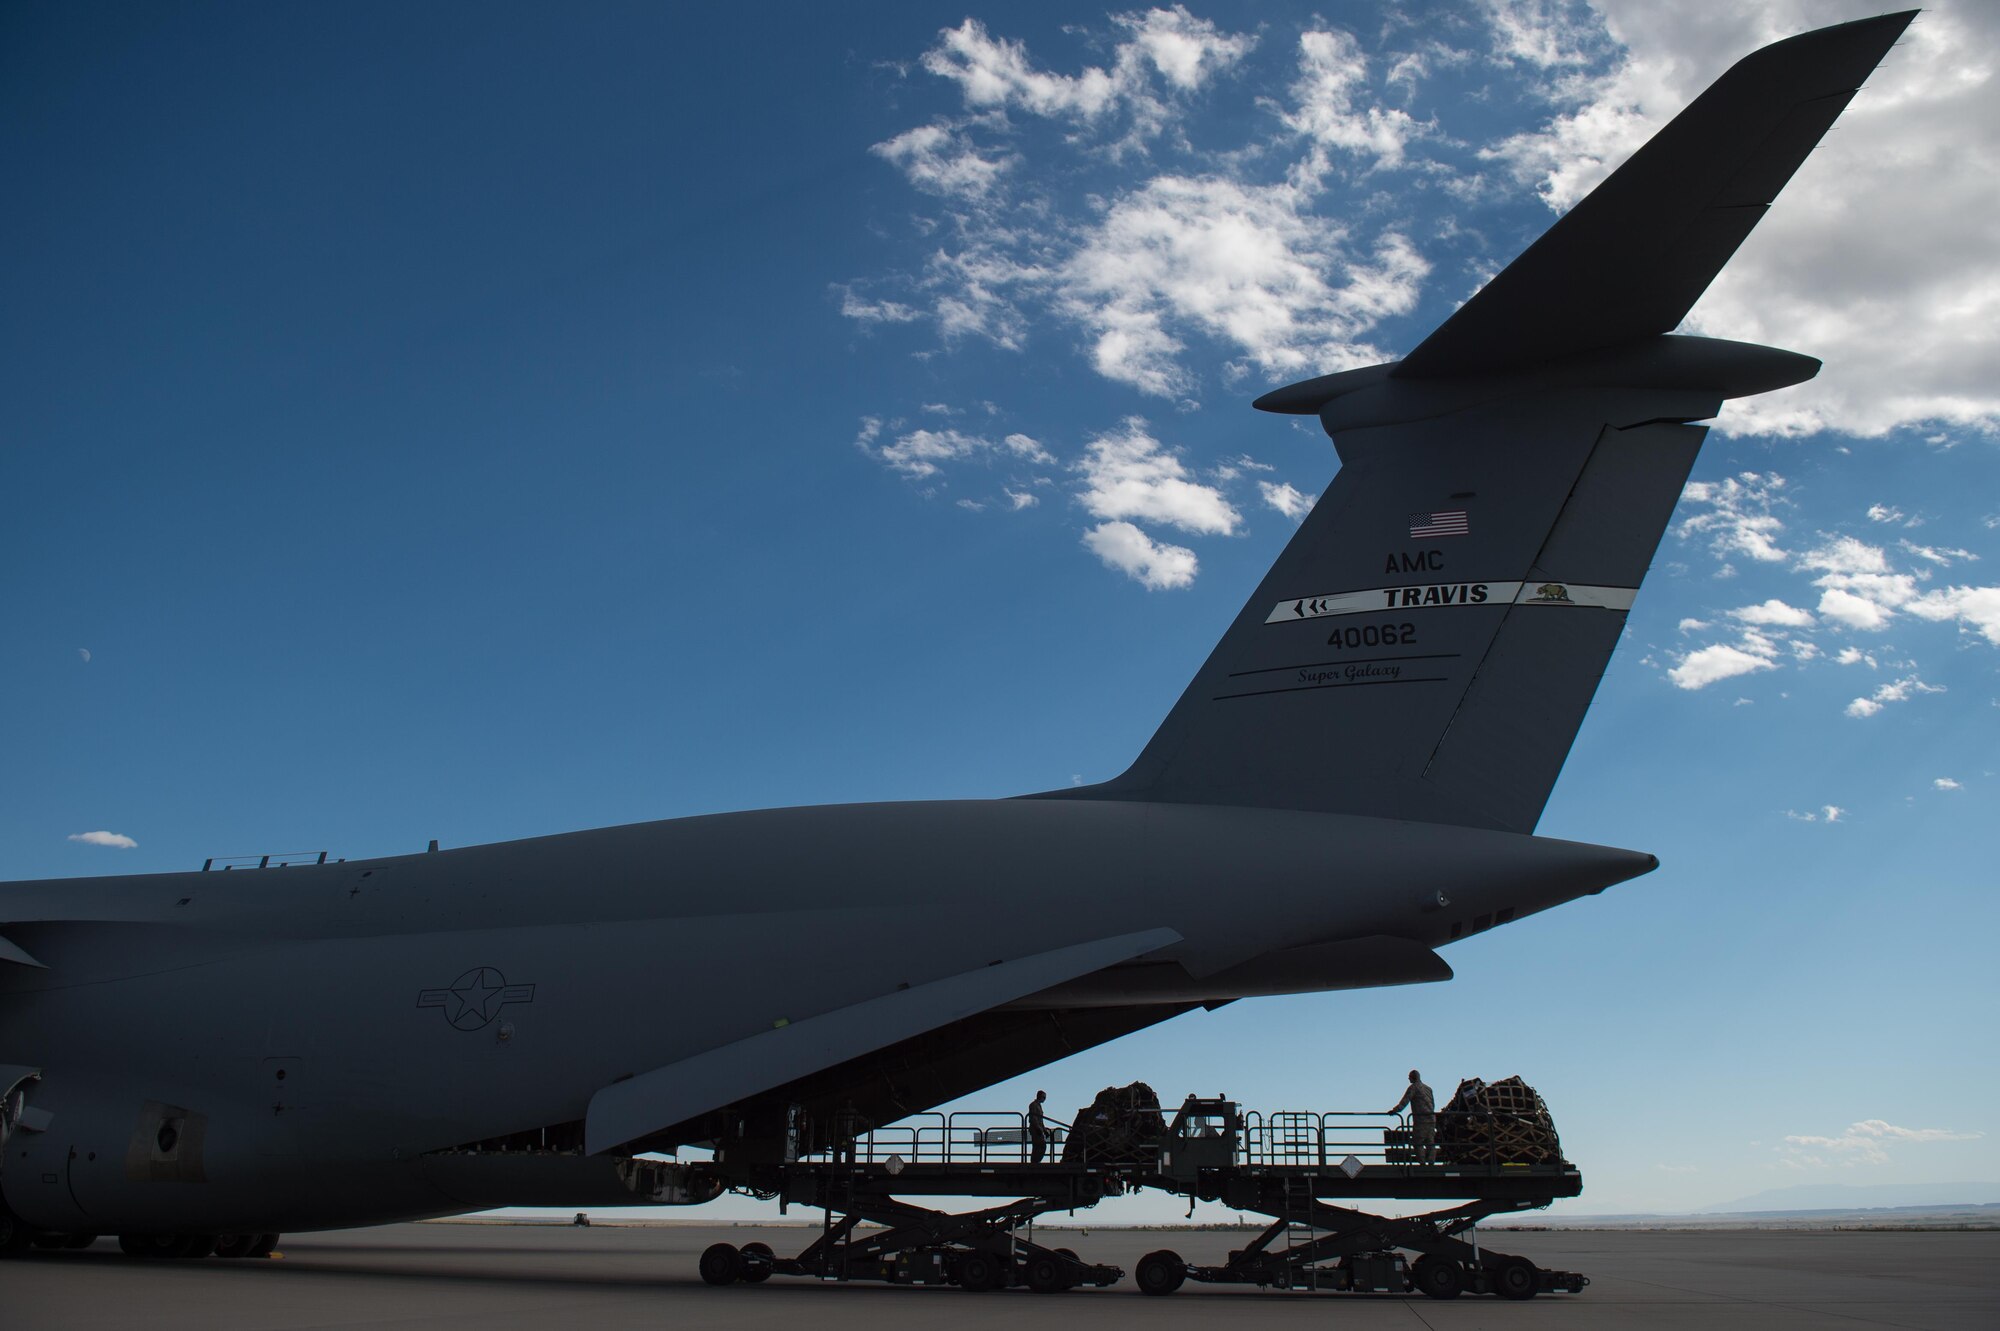 U.S. Airmen assigned to the 821st Contingency Response Group offload cargo from a C-5 Galaxy aircraft during Exercise Cerberus Strike 16-02 at the Fort Carson Air Terminal, Colo., Sept. 09, 2016. C-Strike is a joint exercise where contingency response forces rehearsed potential real-world situations by training with Army counterparts in cargo uploading and downloading on aircraft, aircraft engine running off-loads, communications, aerial port procedures, and air mobility liaison officer operations with airdrops from aircraft. (U.S. Air Force photo by Master Sgt. Joseph Swafford)